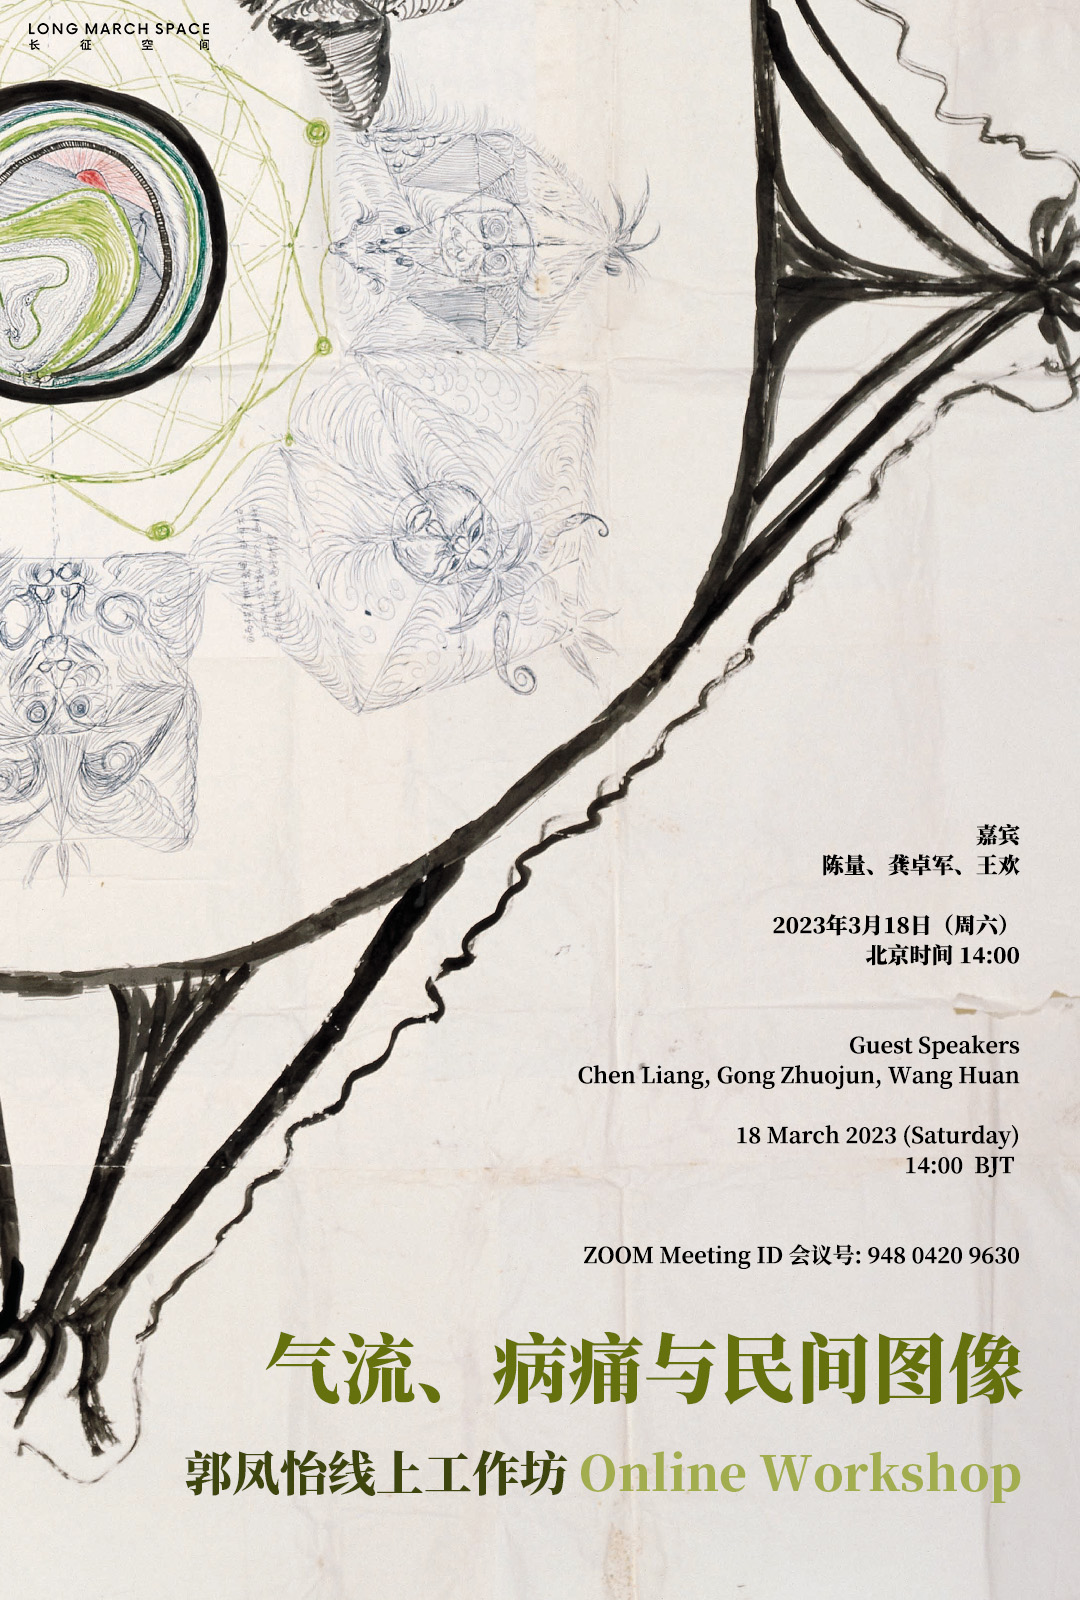 Online workshop "Airflow, Disorder, and Folk Images" on Guo Fengyi's solo exhibition"Cosmic Meridians"